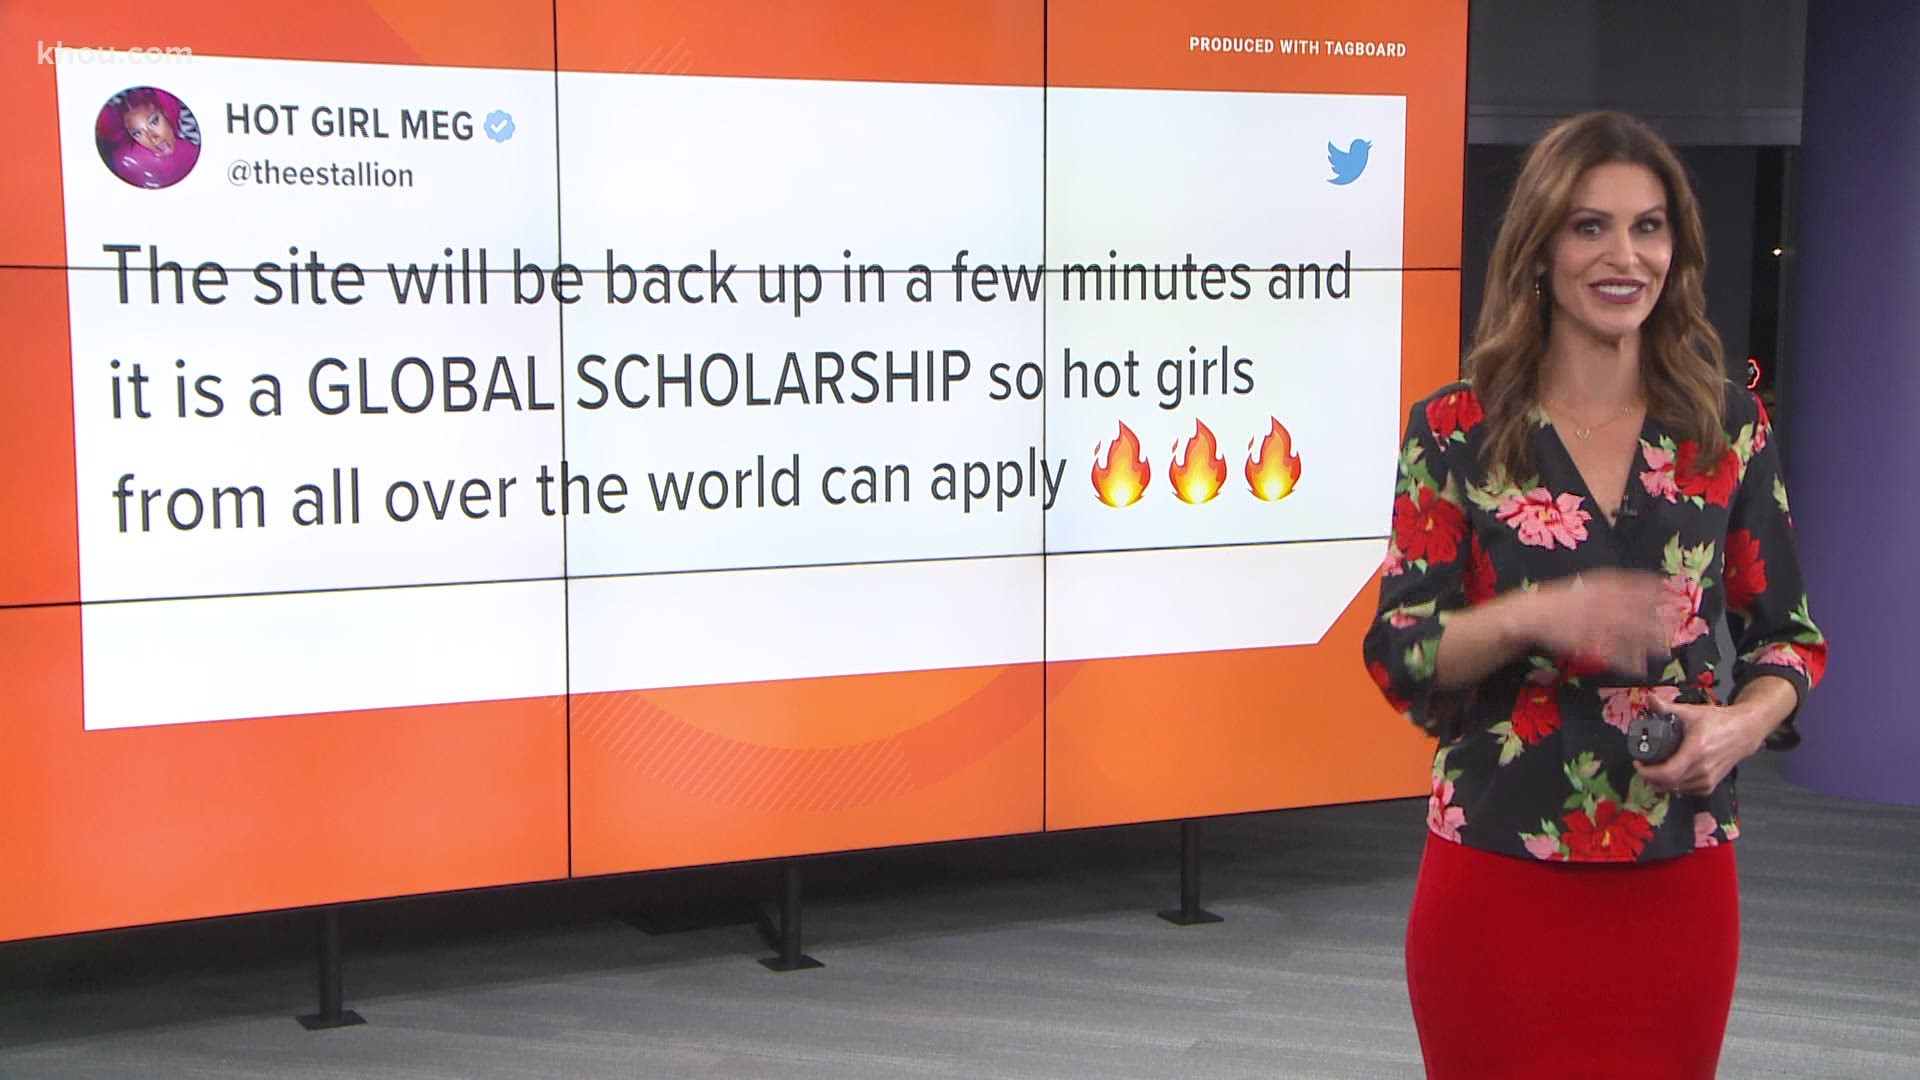 Houston-native rappers Megan Thee Stallion and Travis Scott are giving scholarships to college students in need.